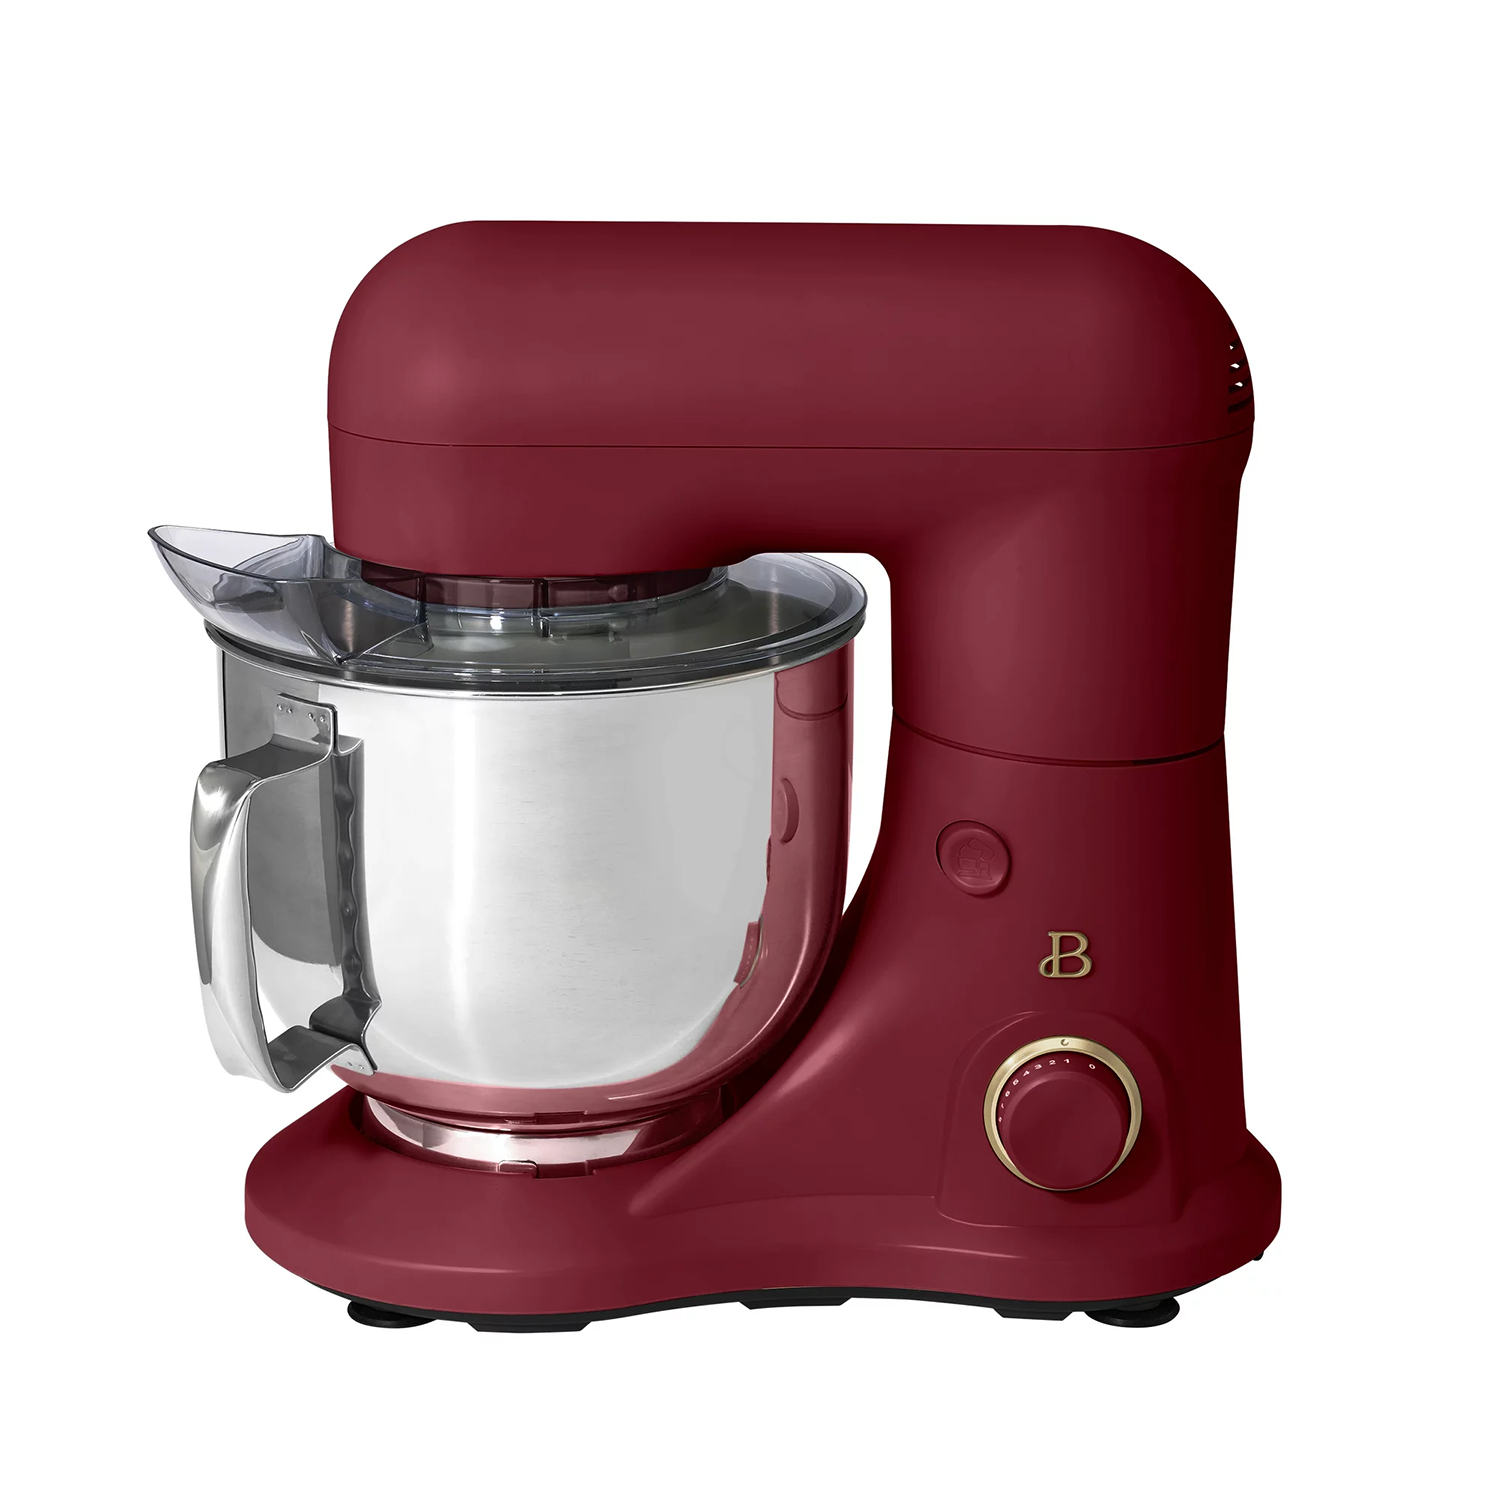 merlot stand mixer beautiful by drew barrymore